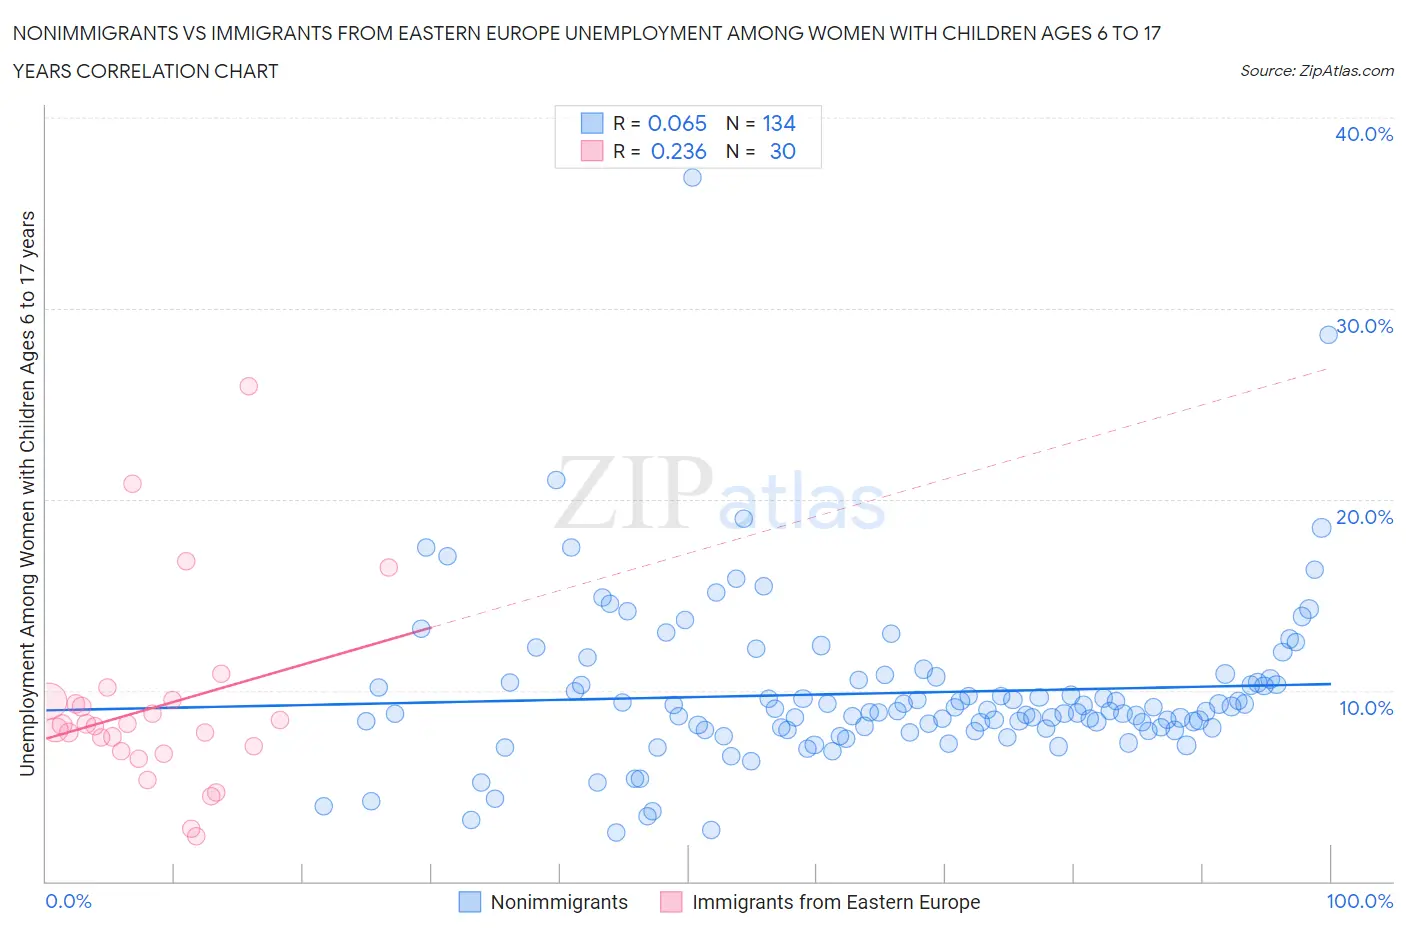 Nonimmigrants vs Immigrants from Eastern Europe Unemployment Among Women with Children Ages 6 to 17 years